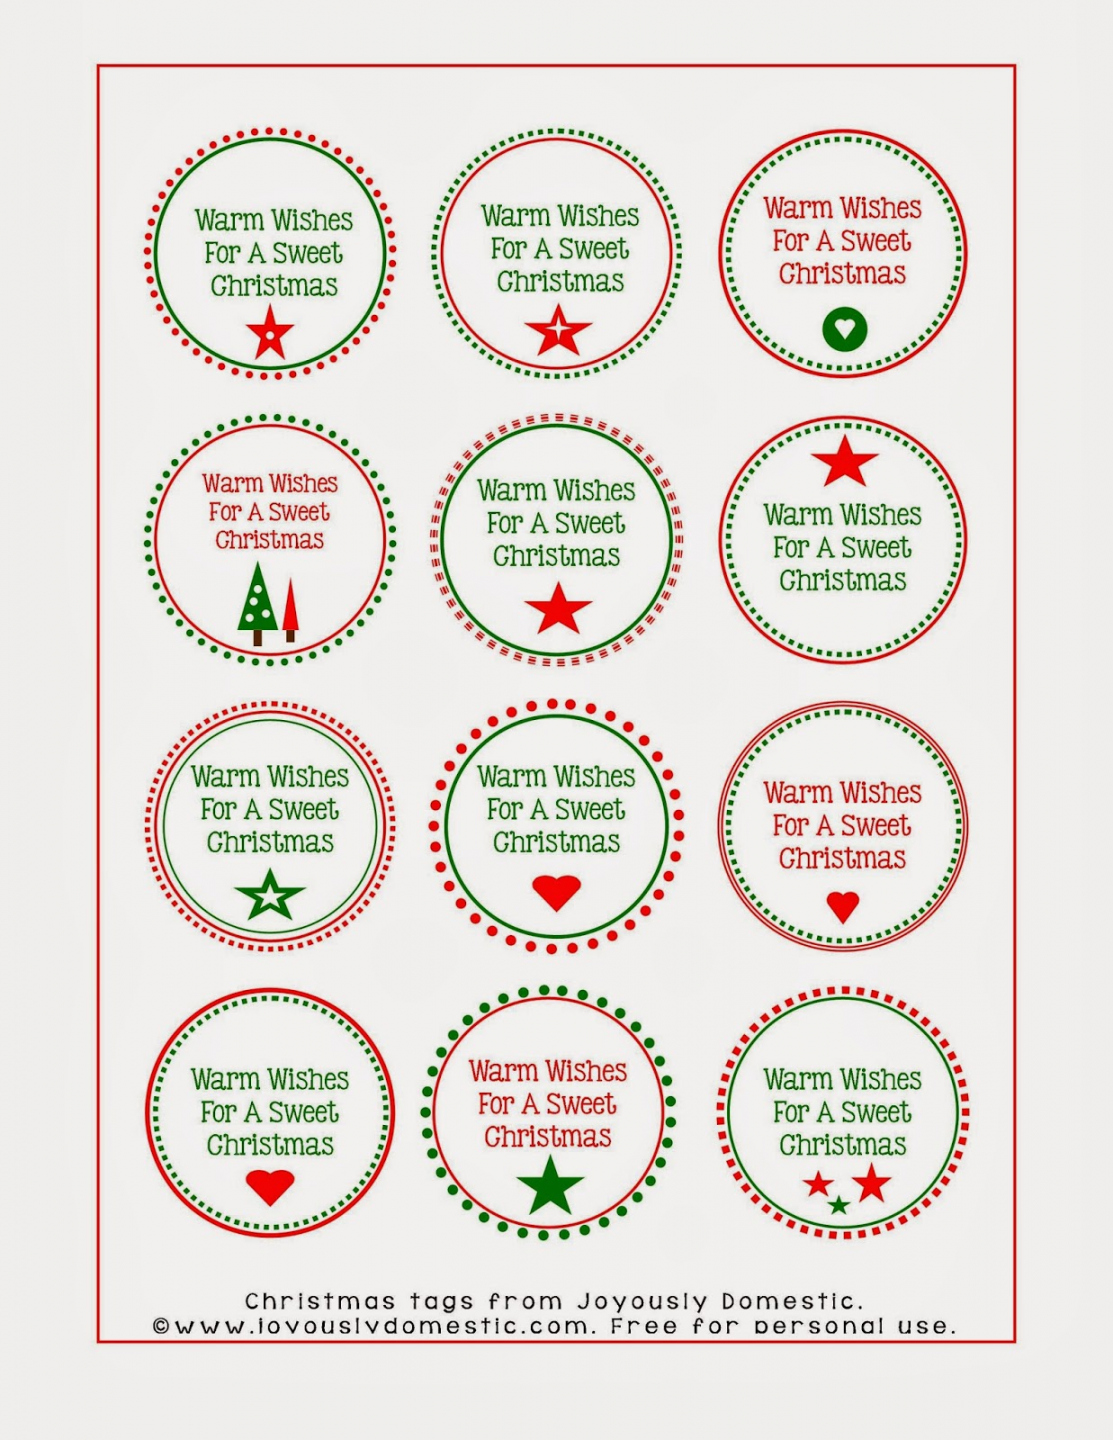 Joyously Domestic: Holiday Hot Cocoa Kits with Homemade Stir  - FREE Printables - Free Printable Hot Chocolate Gift Tags